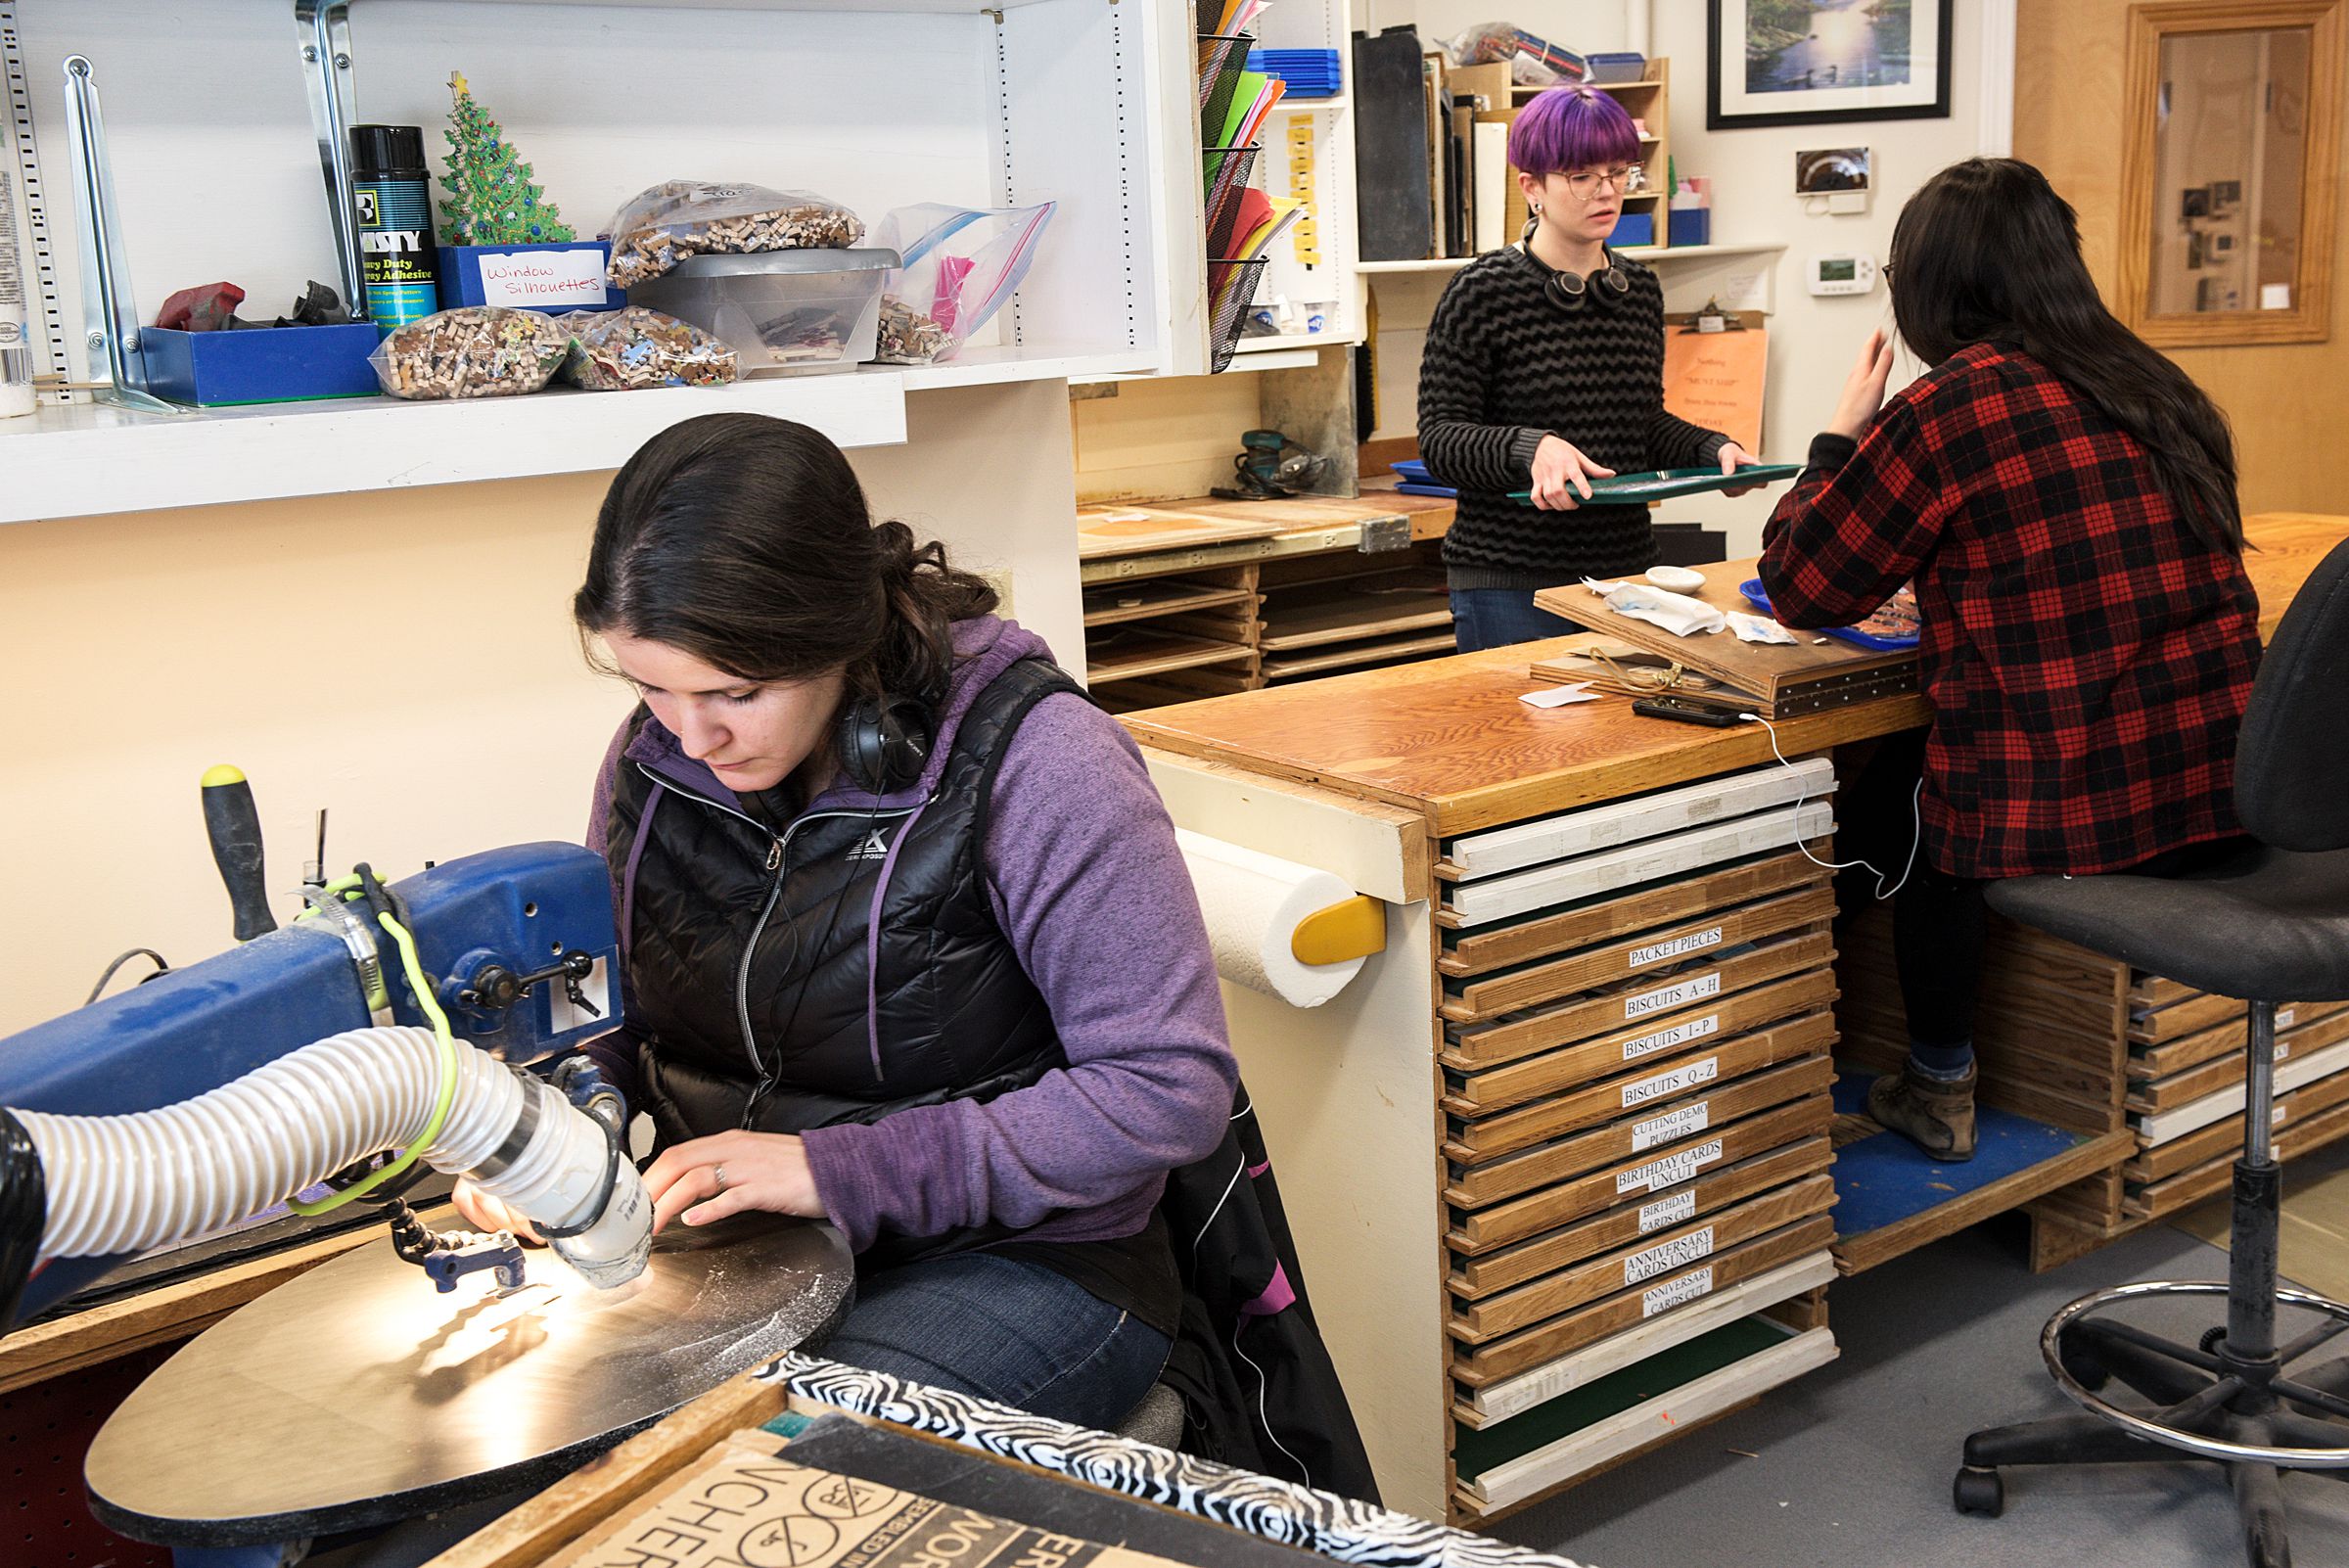 Christina Julian cuts a puzzle at left as apprentice employees Marisa Chapin, middle, and Kat Chau, right, work in the finishing area at Stave Puzzles, where pieces are touched up and the backs of the puzzles are sanded, polyurethaned and buffed in Wilder, Vt., Tuesday, Jan. 15, 2019. Apprentices work for six months to a year to learn the craft before their work can be sold. (Valley News - James M. Patterson) Copyright Valley News. May not be reprinted or used online without permission. Send requests to permission@vnews.com.